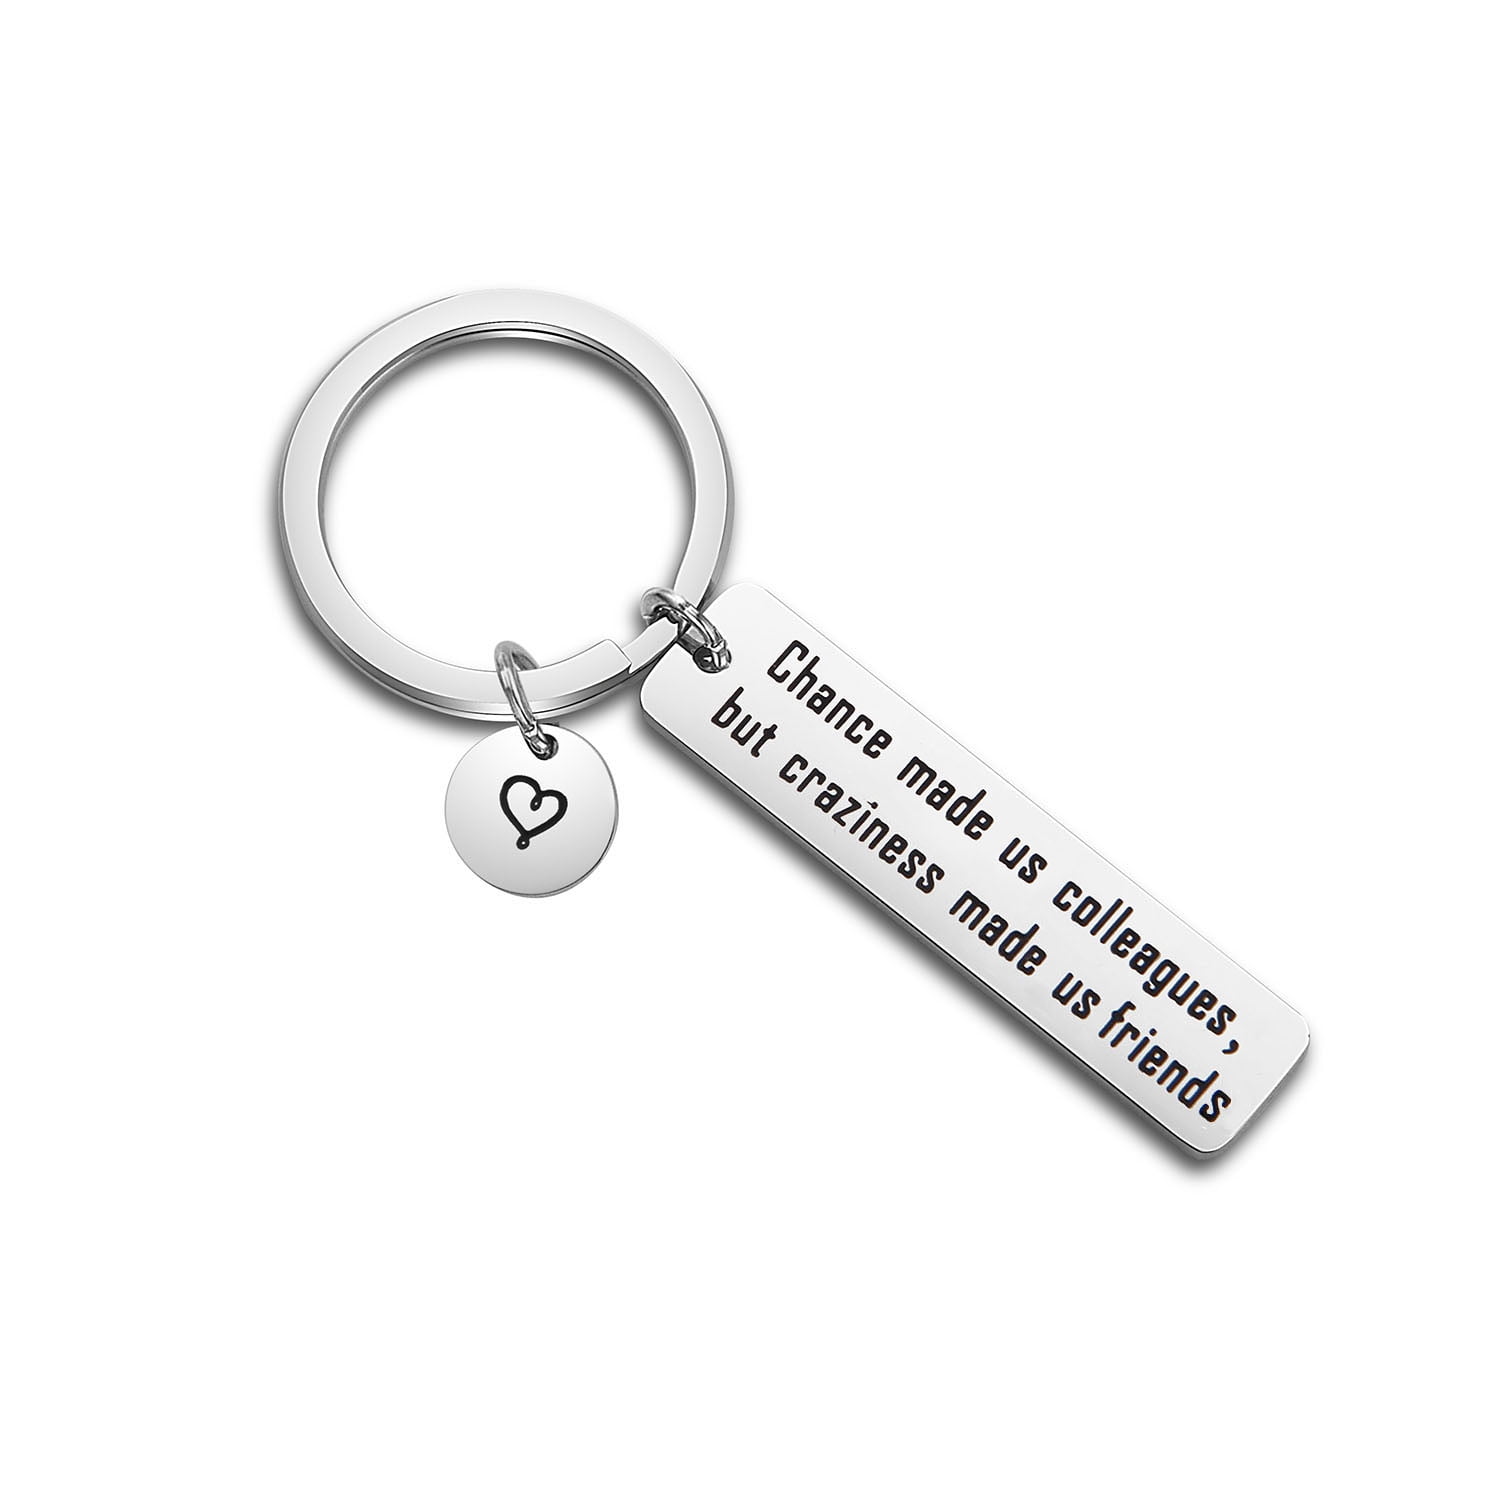 Coworker Leaving Gifts Retirement Best Friend Keyring Gifts Friendship Key Chain 